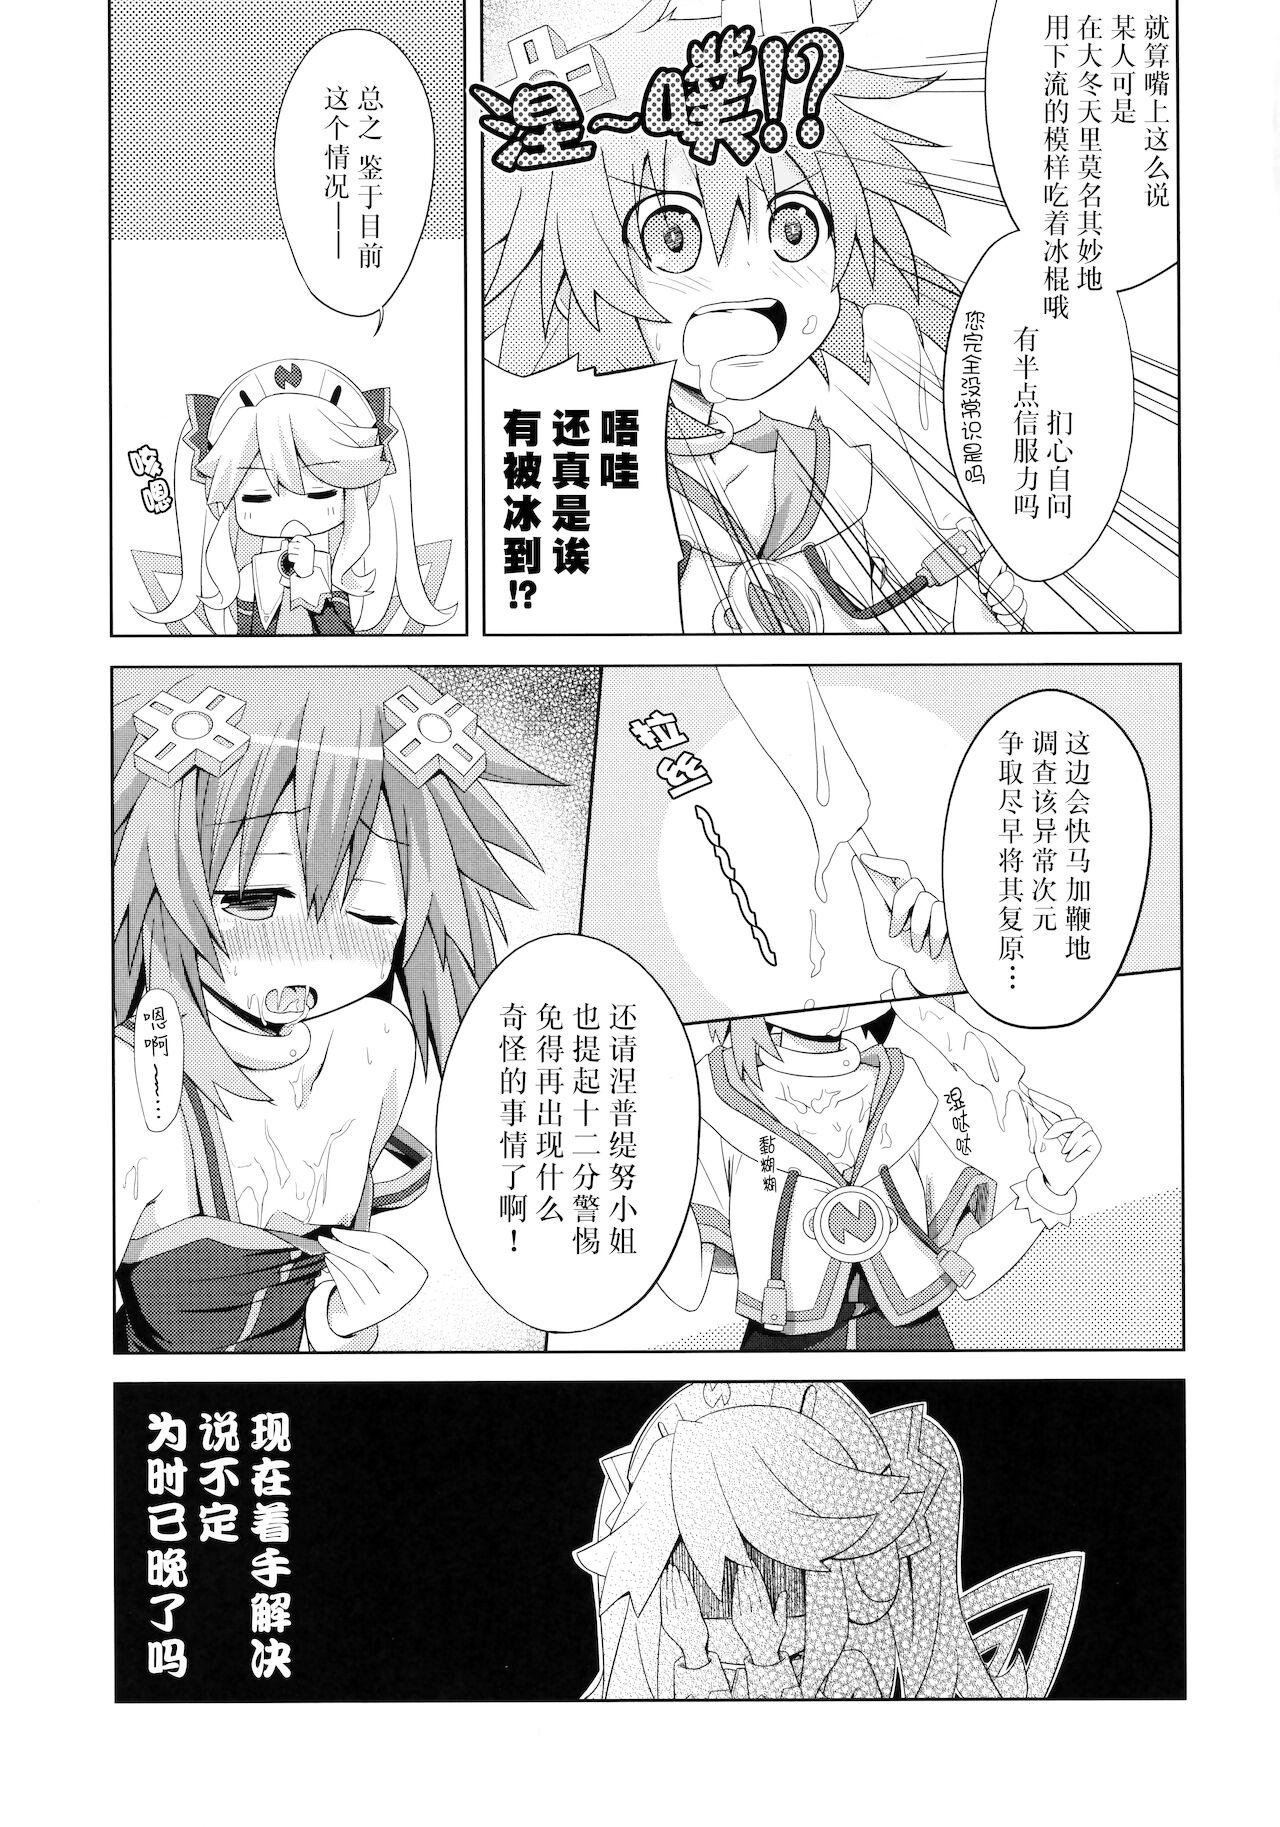 Chicks A certain Nepgear was harmed in the making of this doujinshi - Hyperdimension neptunia | choujigen game neptune Big Pussy - Page 6